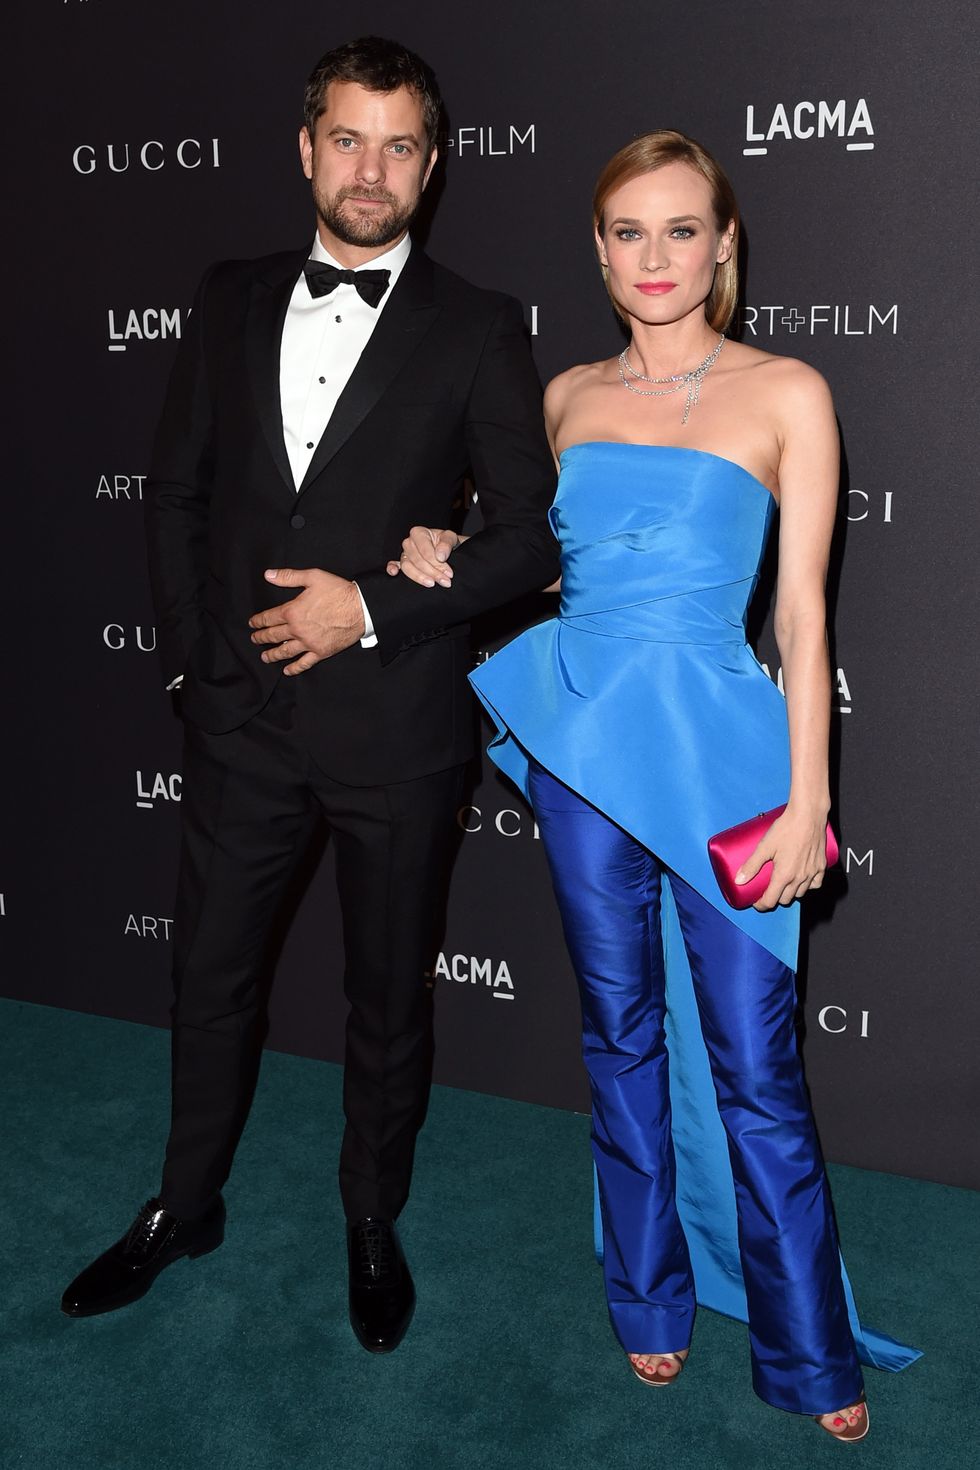 <p>Amidst a summer of celebrity breakups, Jackson and Kruger also <a href="http://www.harpersbazaar.com/celebrity/latest/a16720/diane-kruger-joshua-jackson-break-up/" target="_blank" data-tracking-id="recirc-text-link">announced their split back</a> in July. The couple dated for ten years but ultimately decided to part ways and remain friends, with sources saying their hectic schedules were to blame. </p>